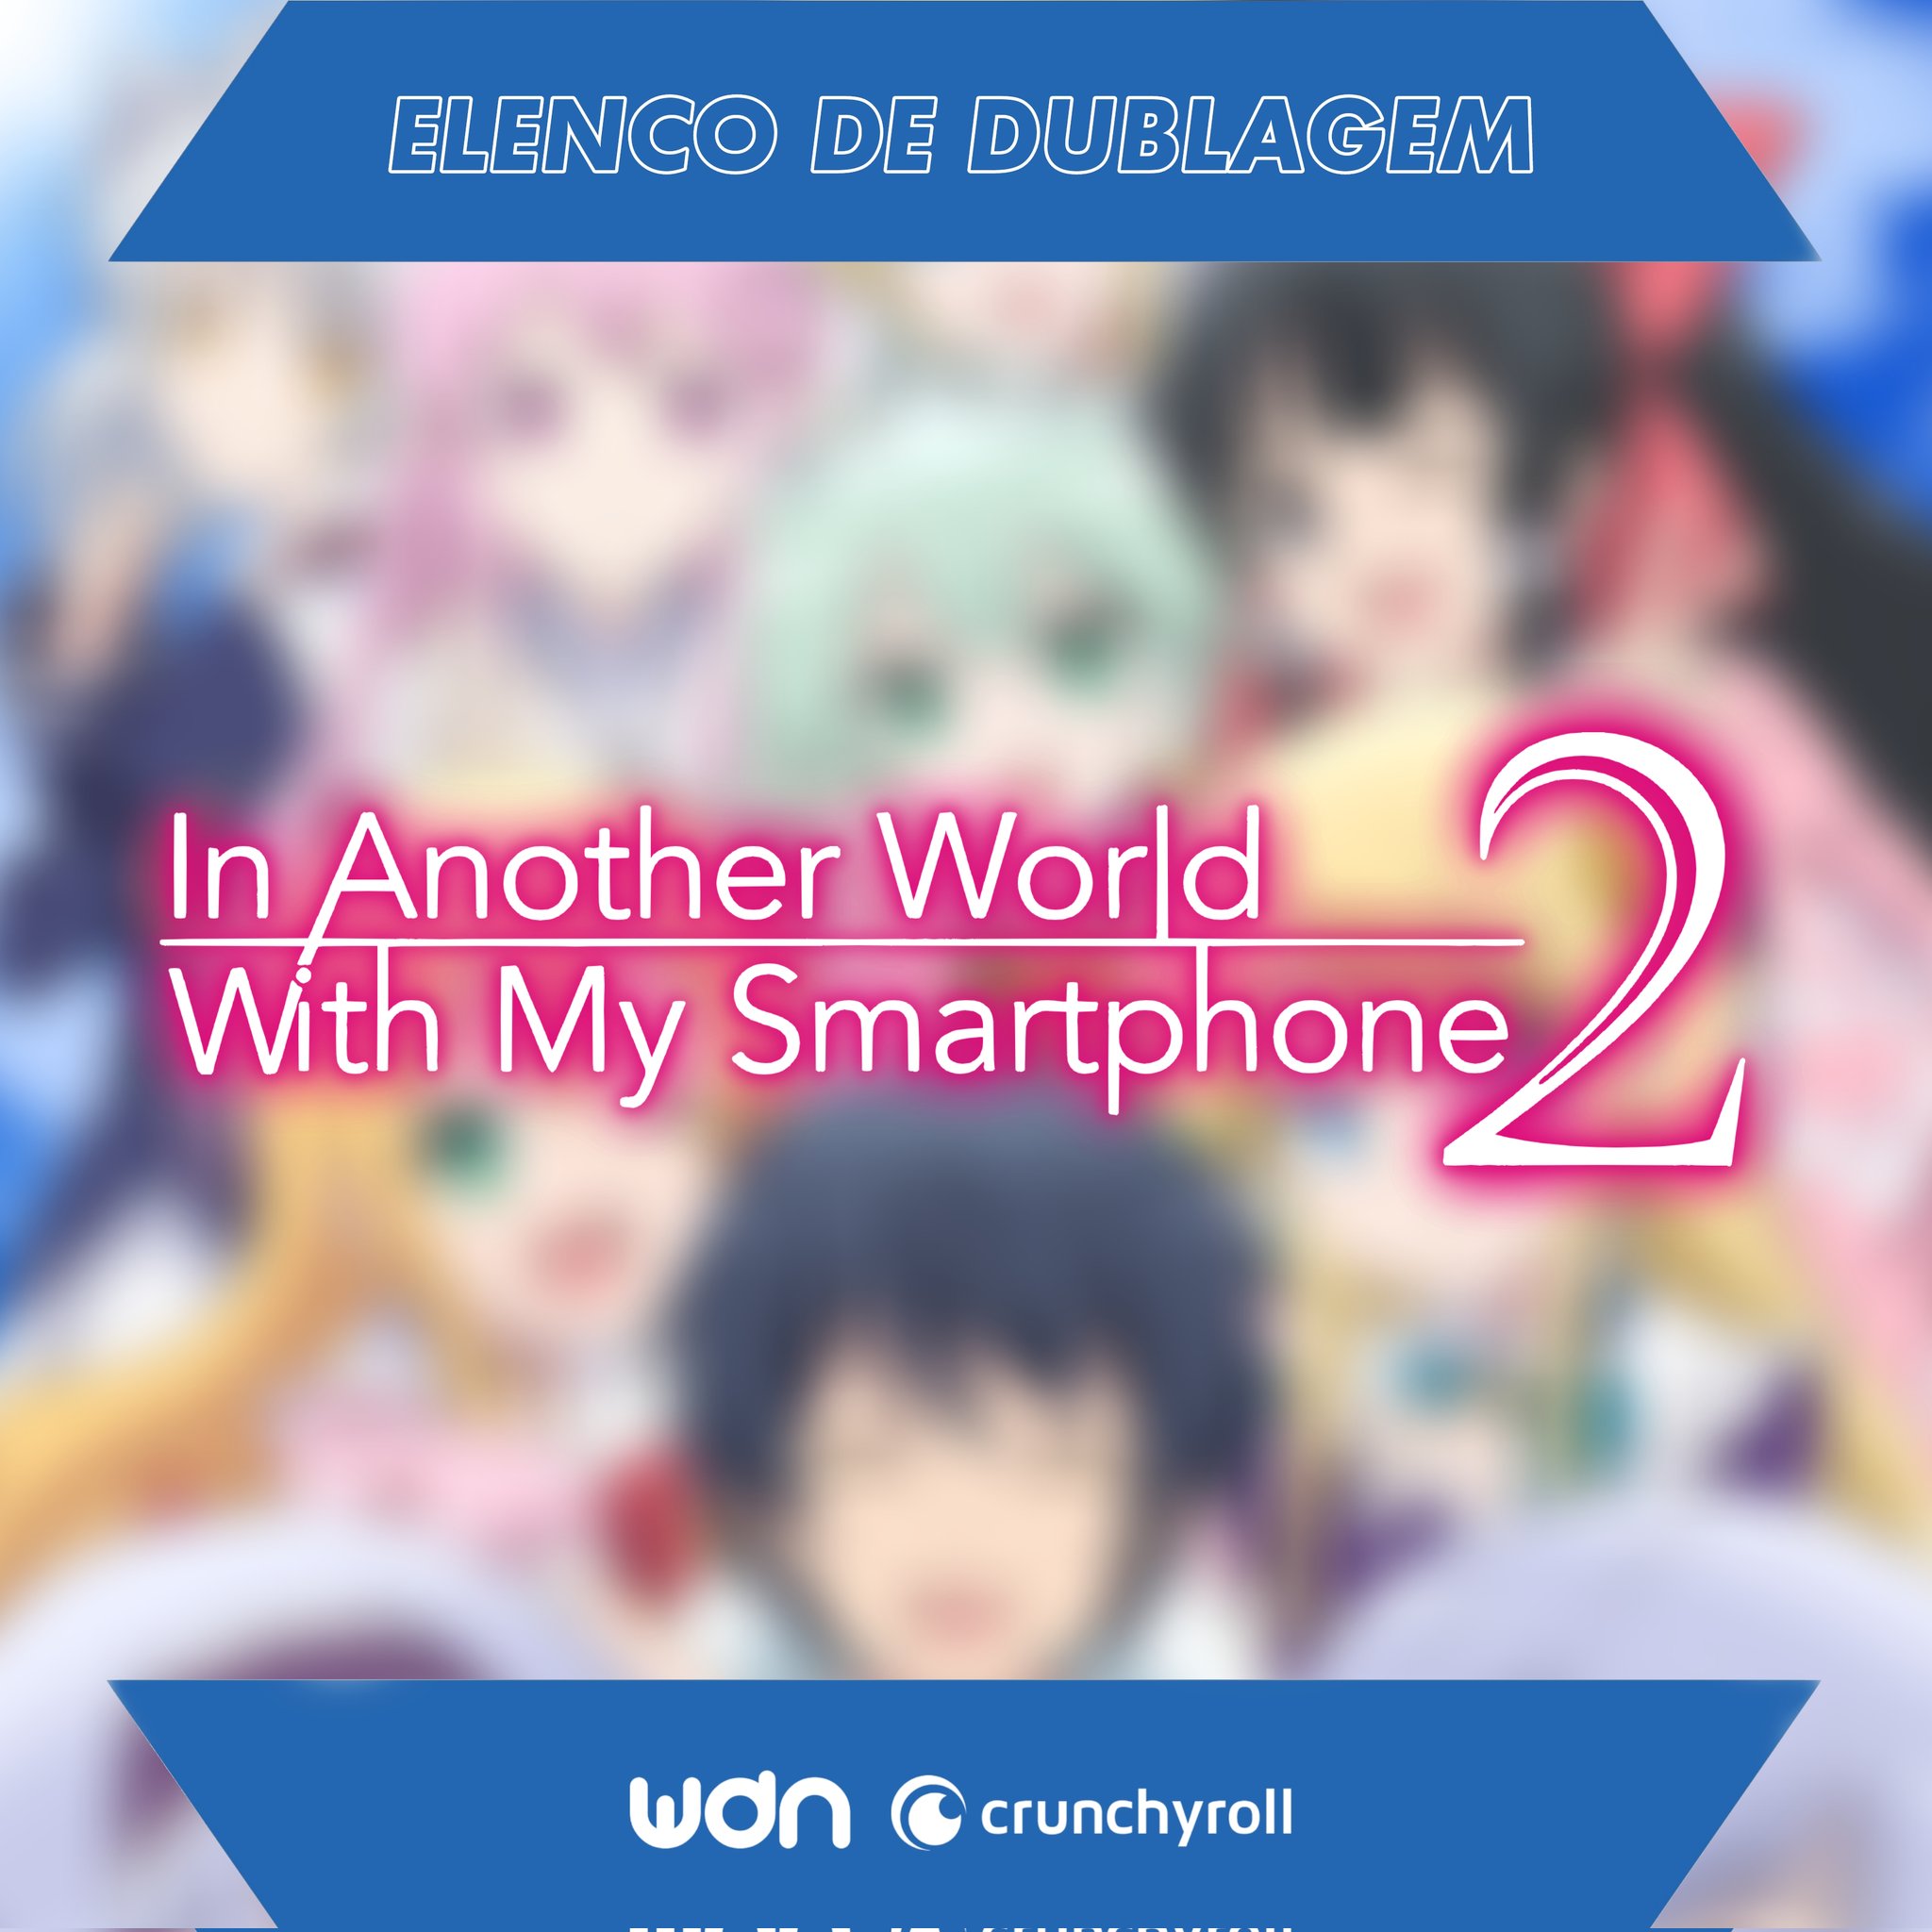 DUBLADORES DE IN ANOTHER WORLD WITH MY SMARTPHONE!! 